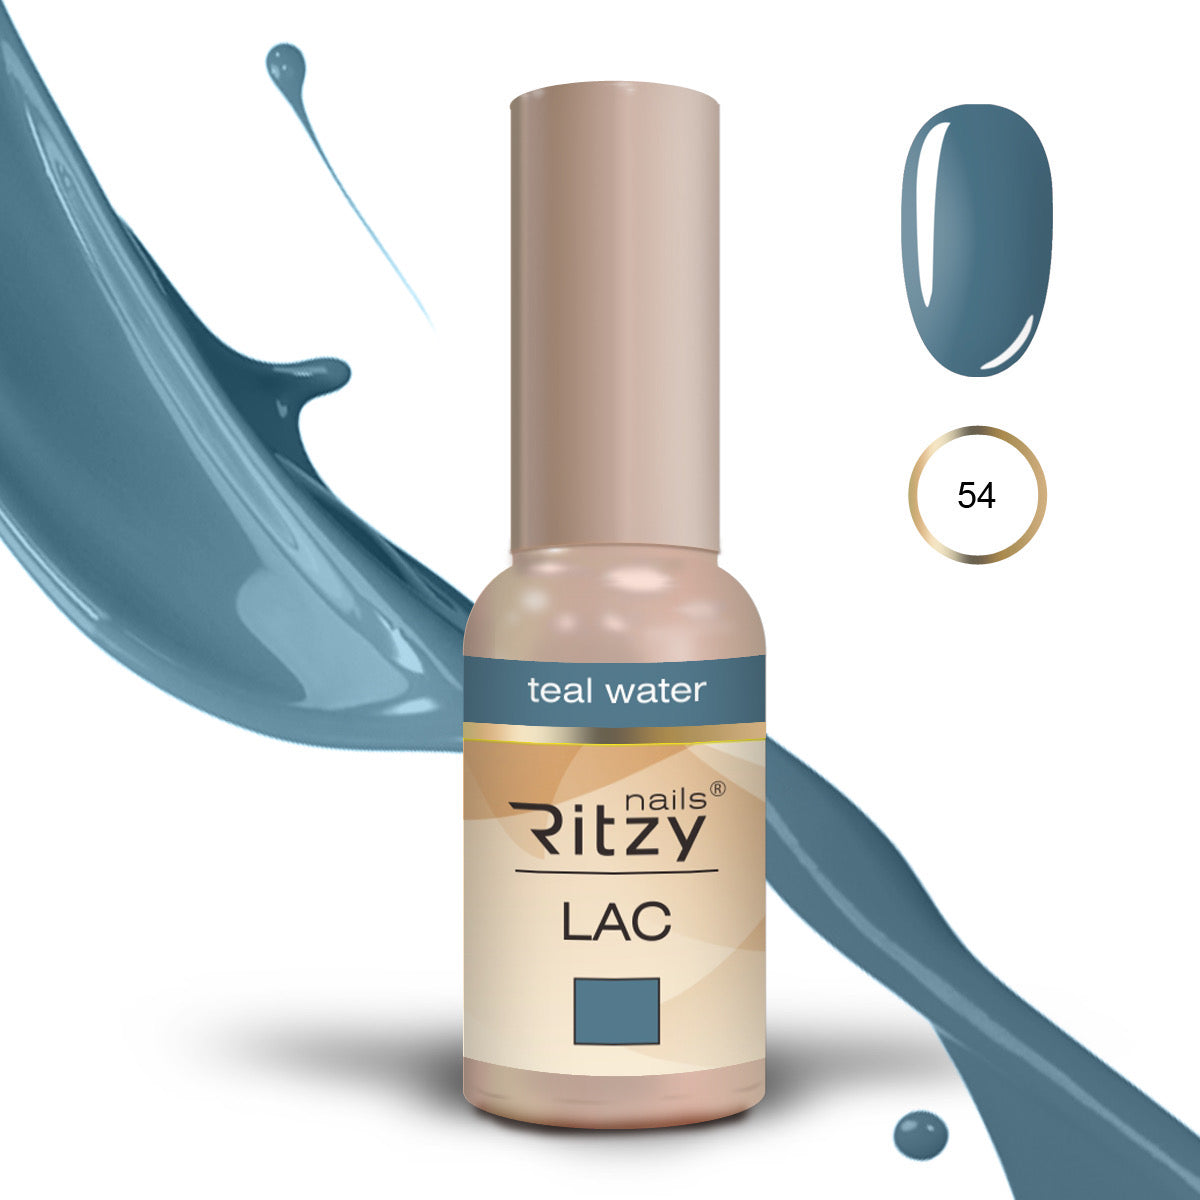 Ritzy Lac Teal water Nr 54